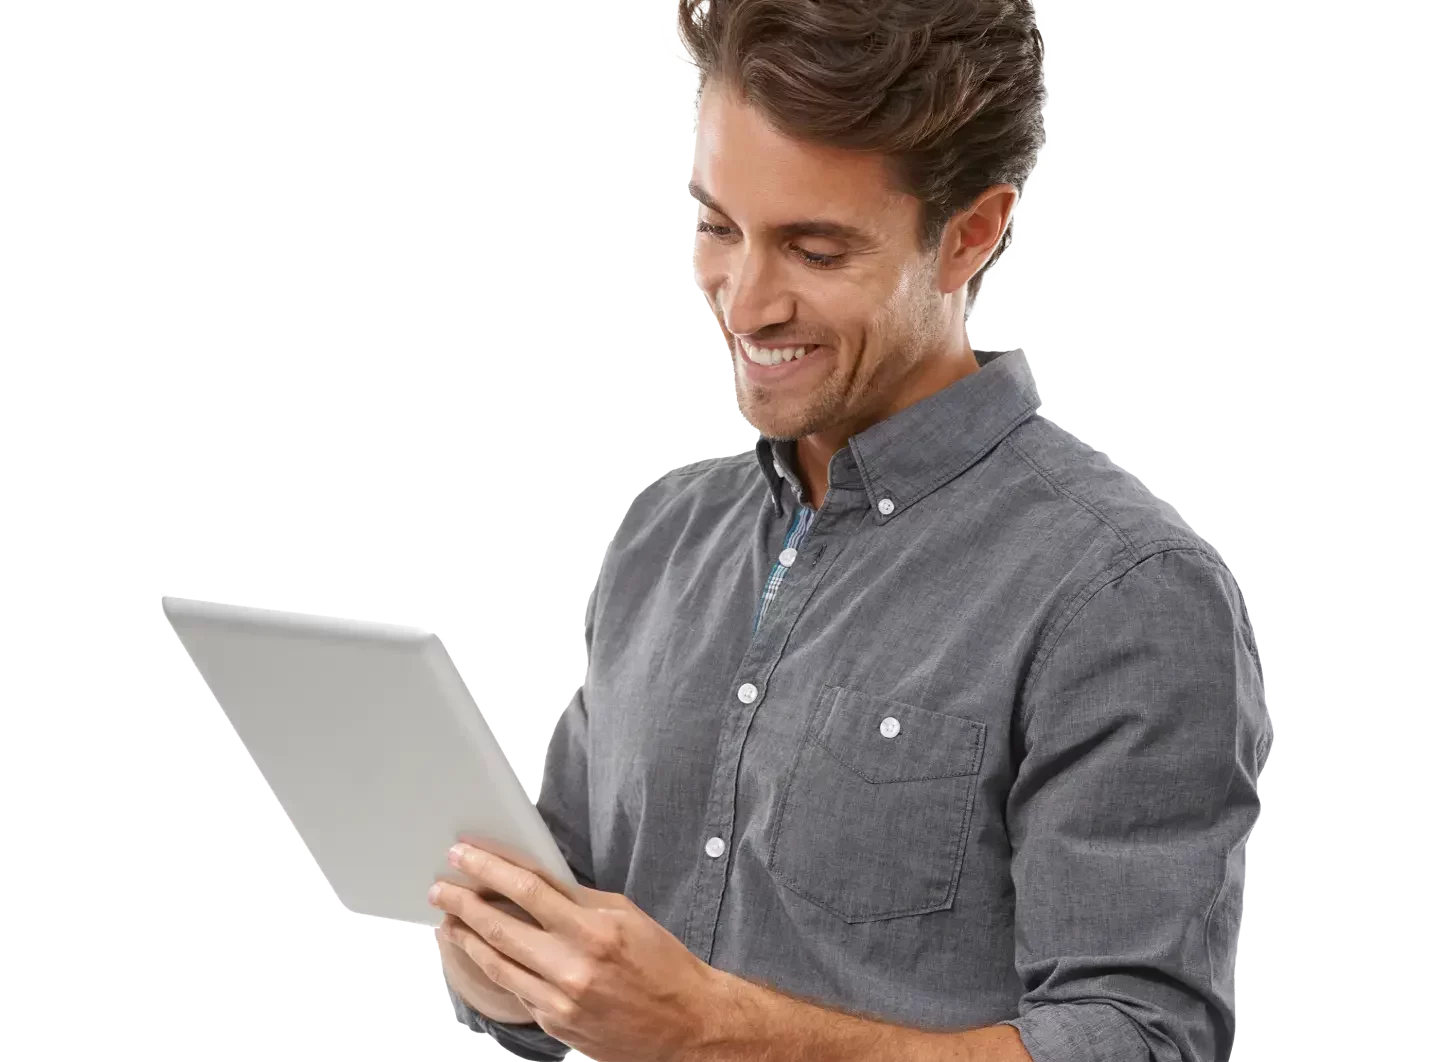 Man in a button up shirt holding a digital tablet and smiling